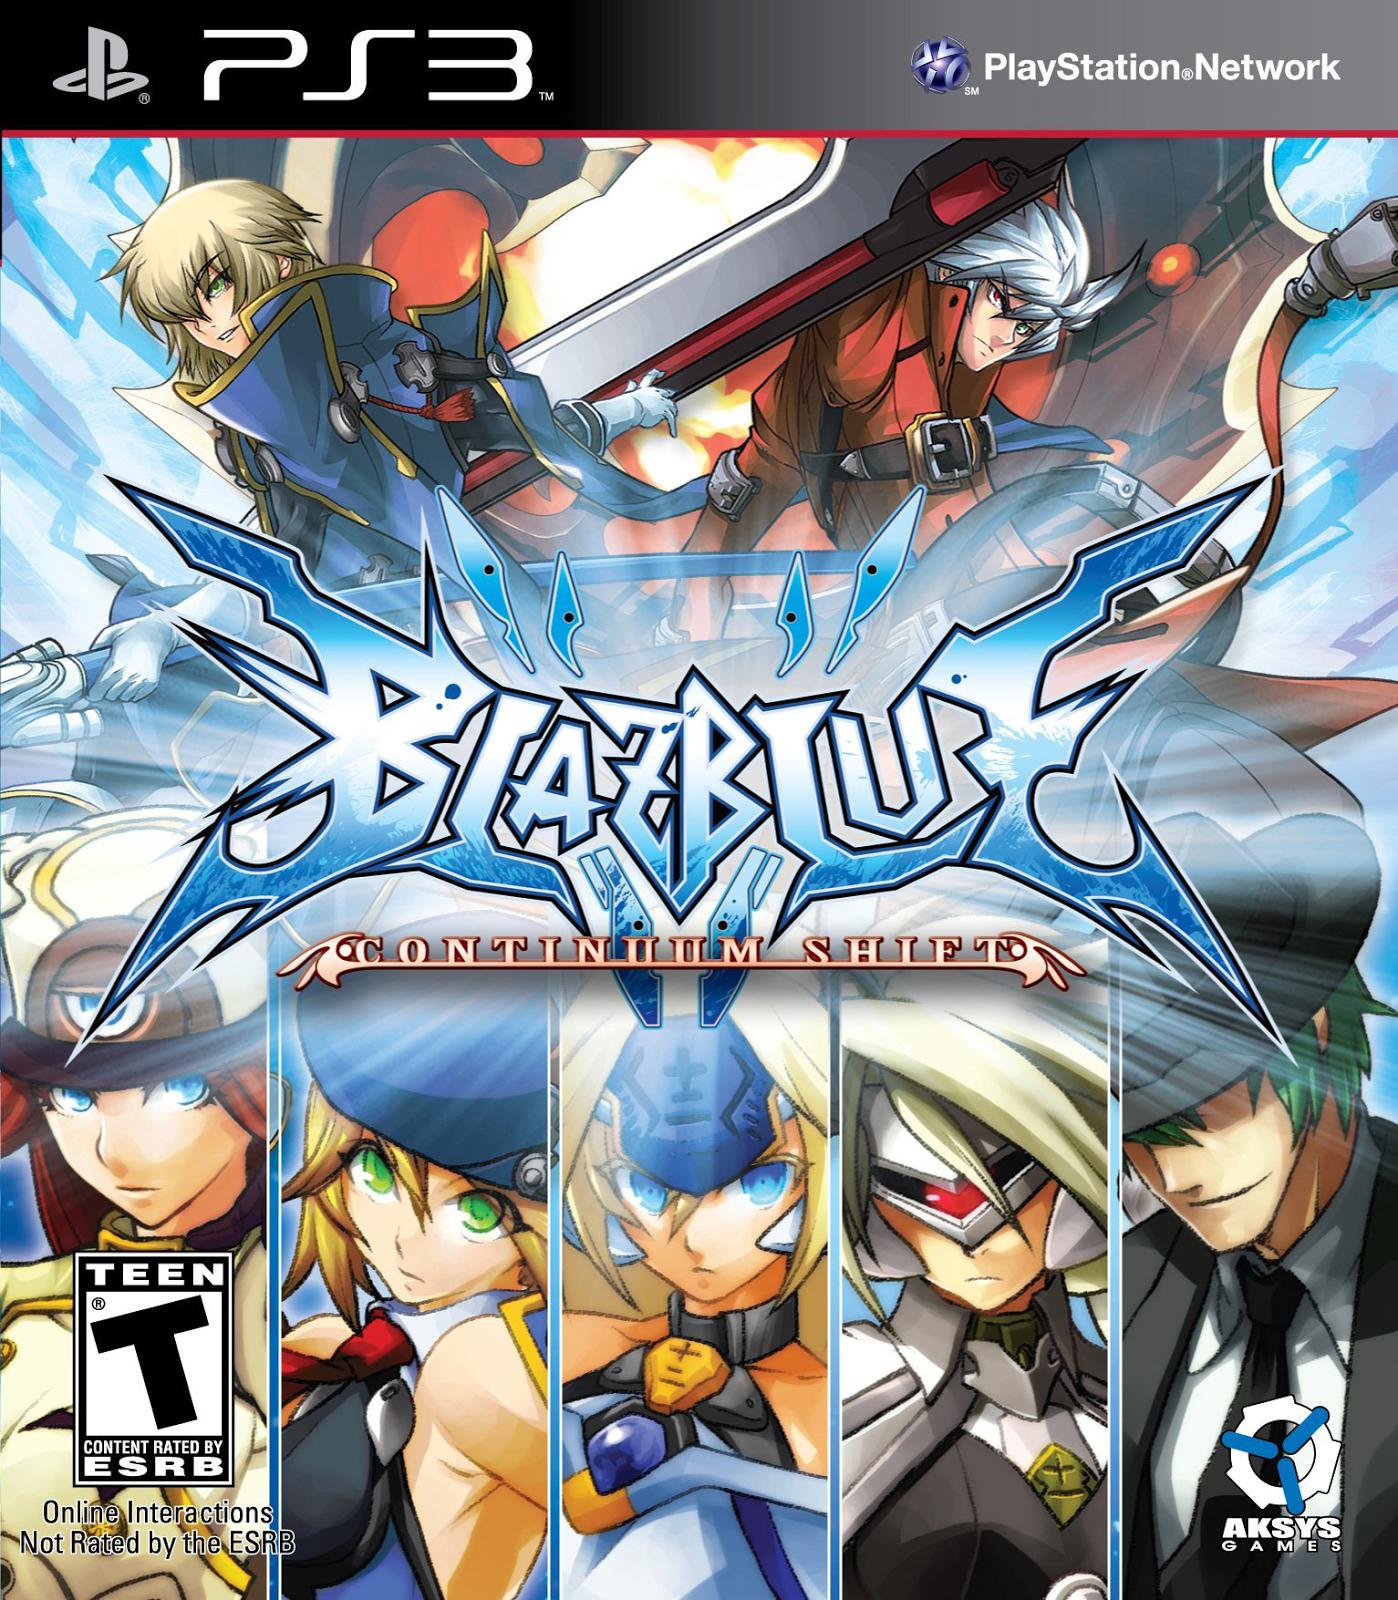 BlazBlue: Continuum Shift - PlayStation 3 (PS3) Game